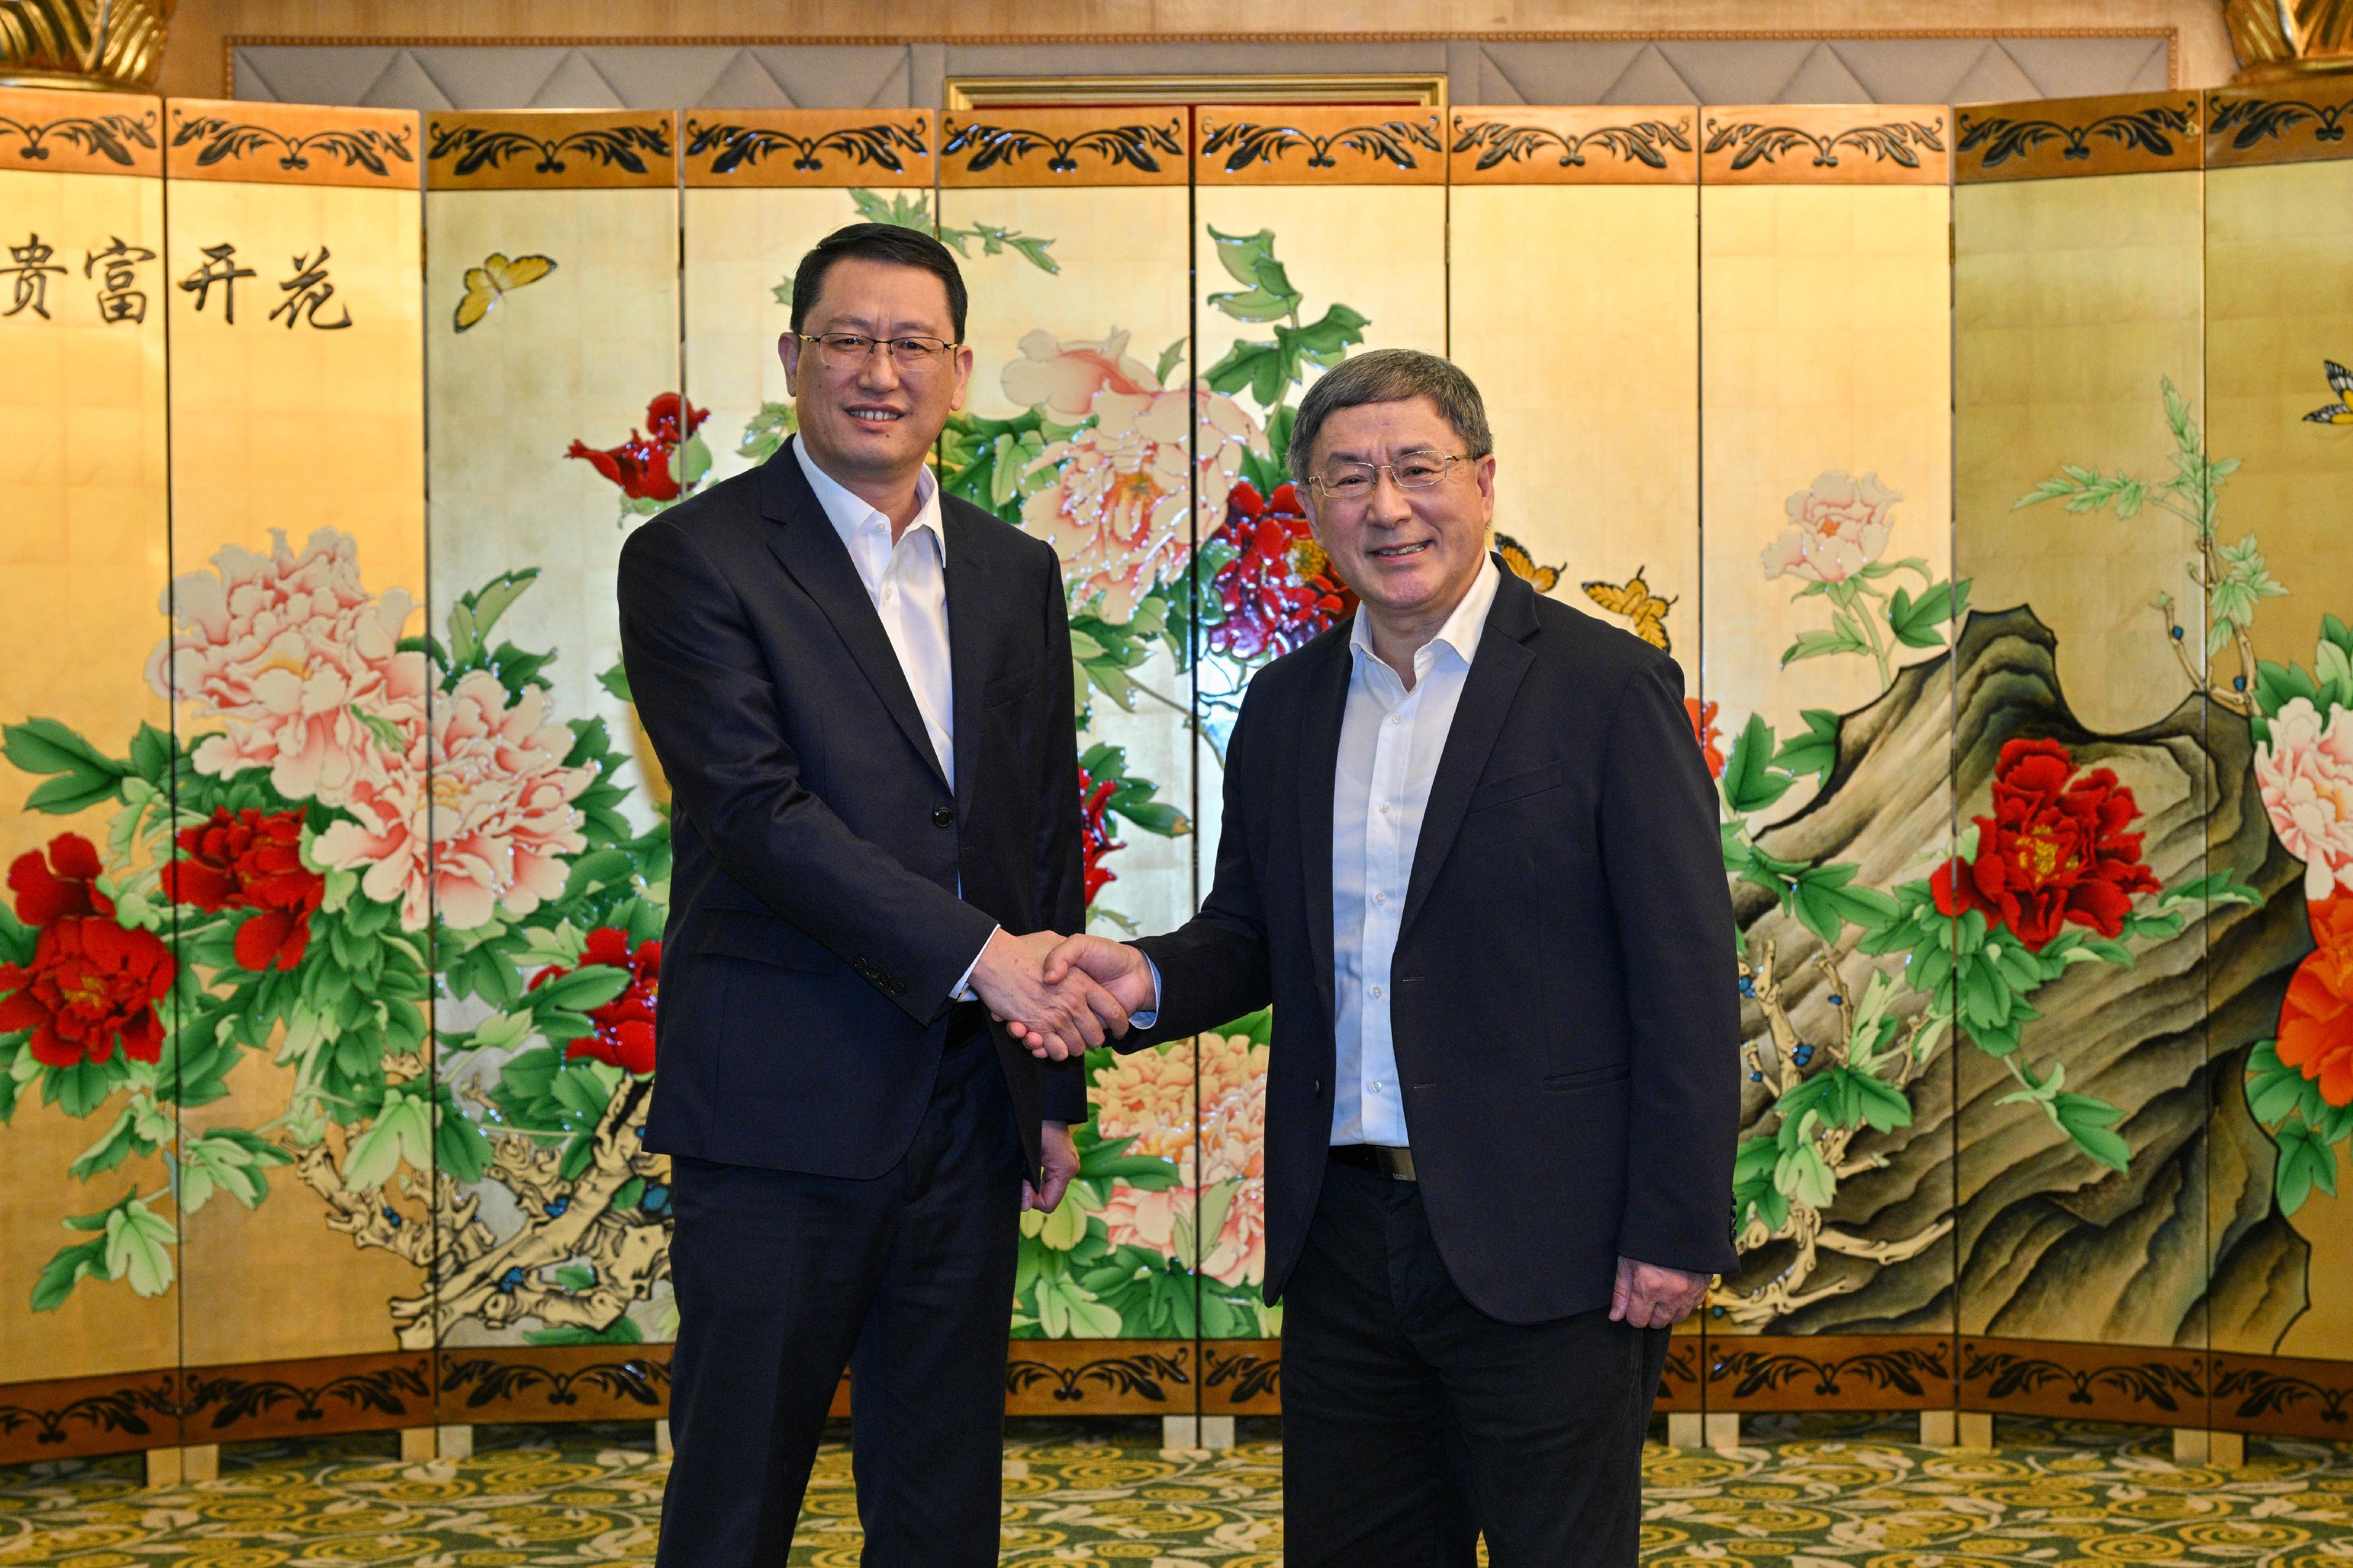 The Deputy Chief Secretary for Administration, Mr Cheuk Wing-hing (right), is pictured with member of the Standing Committee of the Communist Party of China (CPC) Guangzhou Municipal Committee and Secretary General of the CPC Guangzhou Municipal Committee, Mr Bian Liming (left), in Guangzhou today (September 13) before their lunch meeting.
